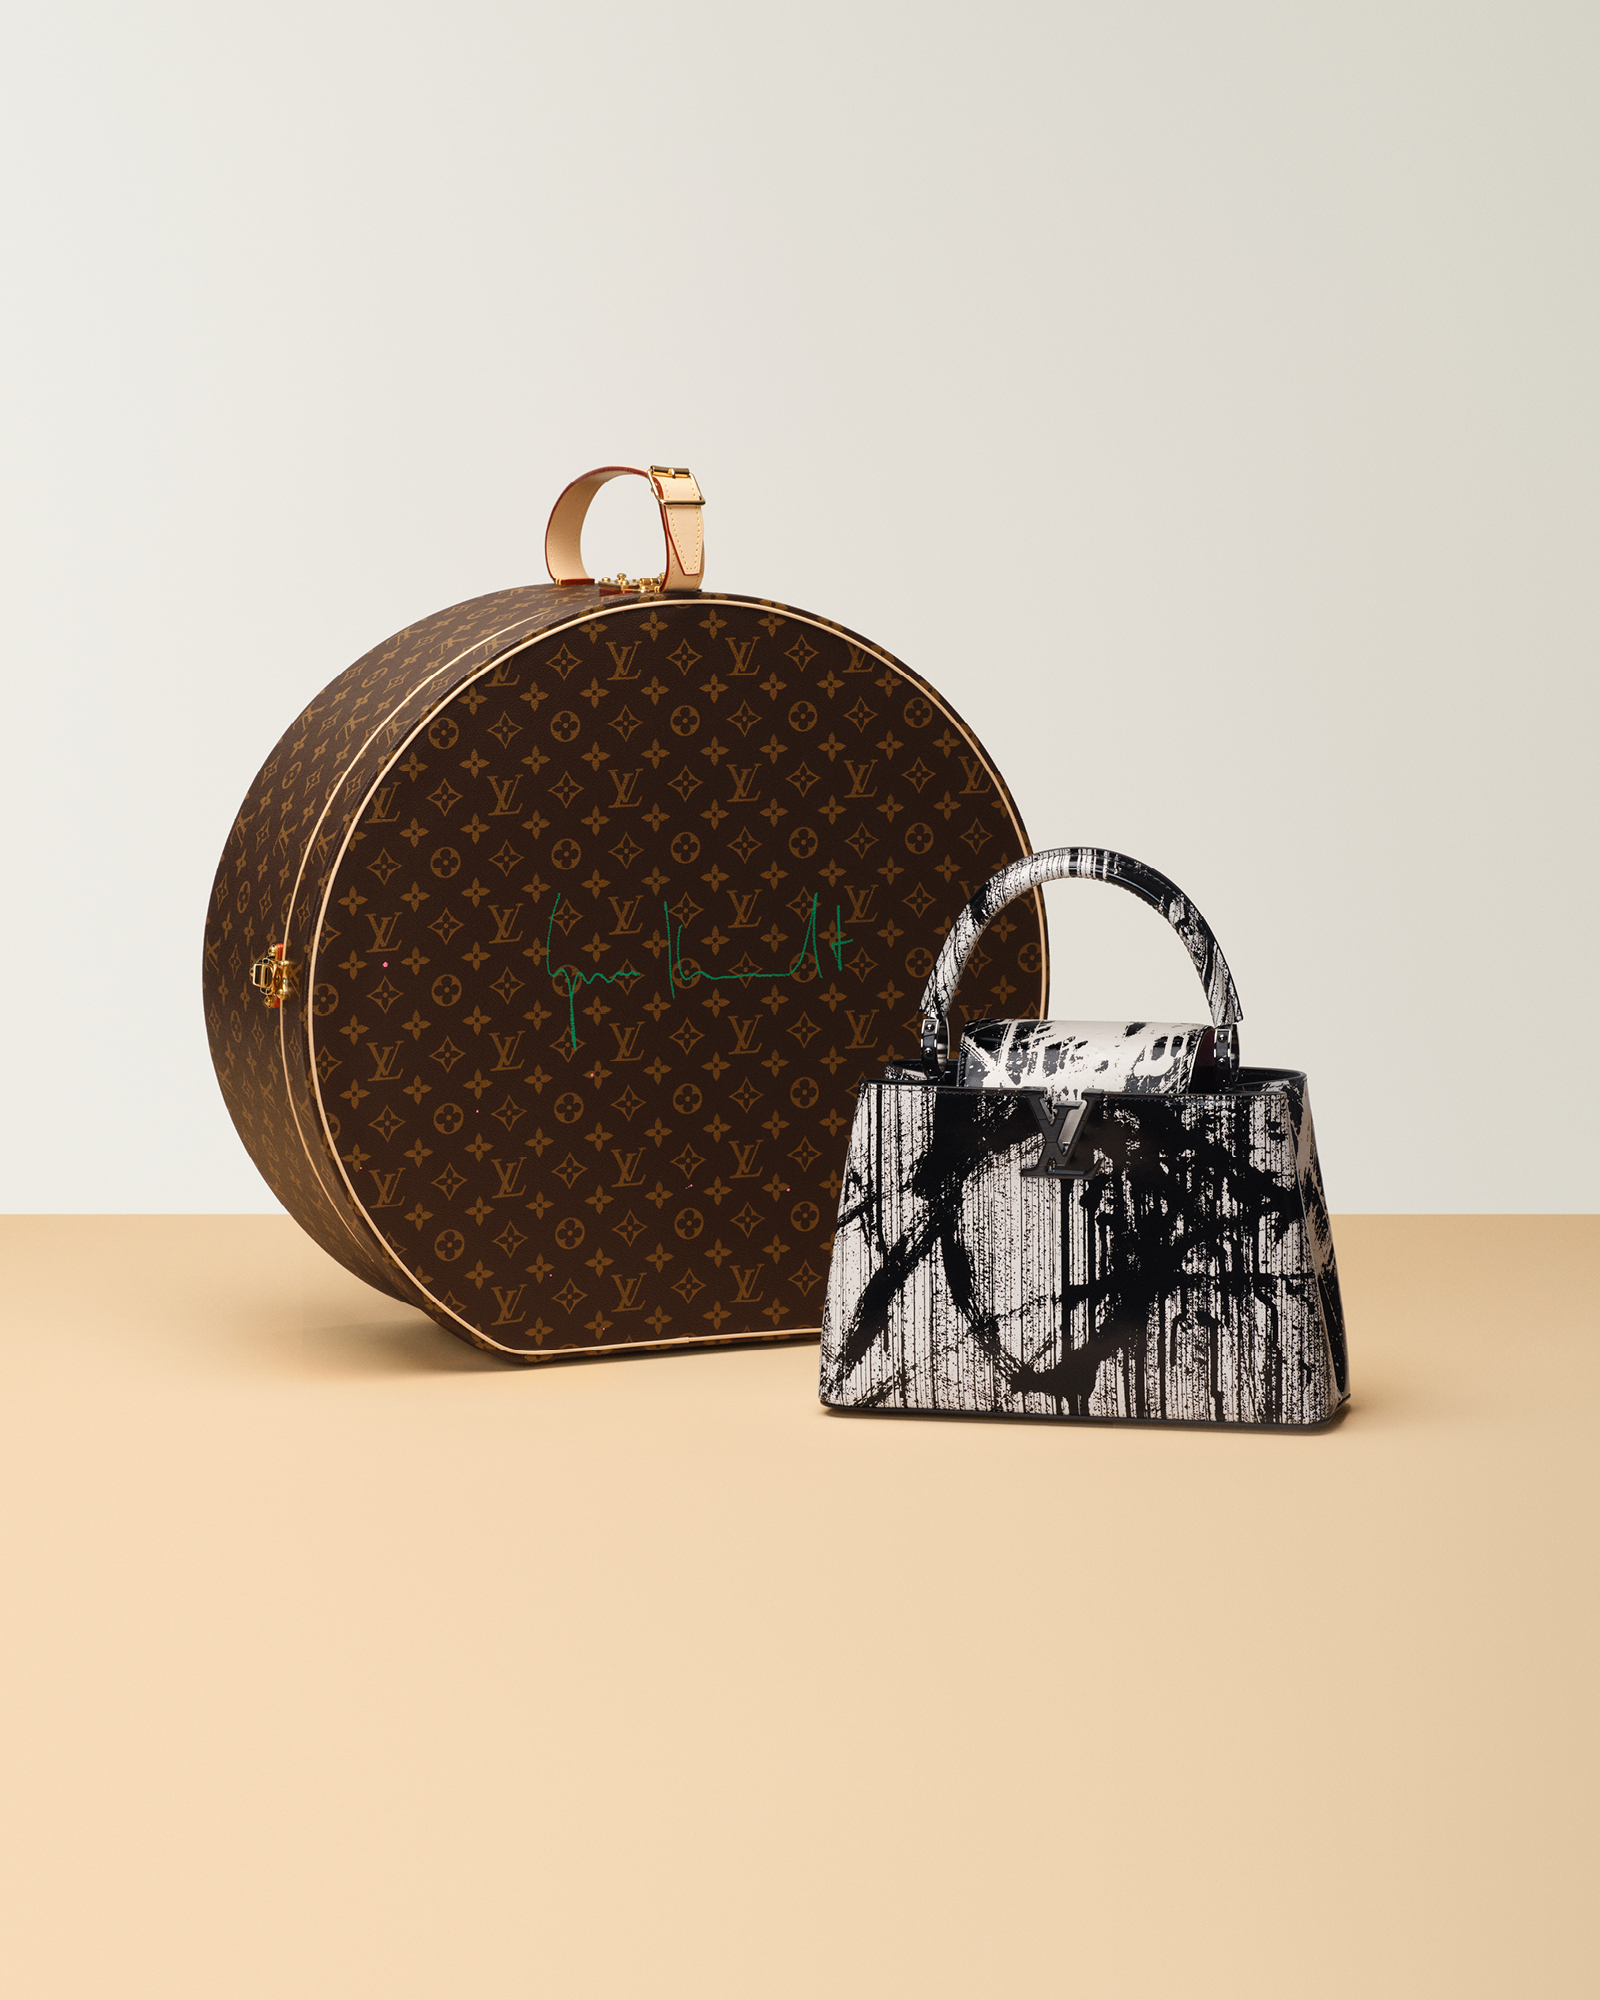 Fancy a Louis Vuitton Bag by Your Favorite Contemporary Artist? A Charity  Auction With Sotheby's Offers a Chance to Snag One for a Cause